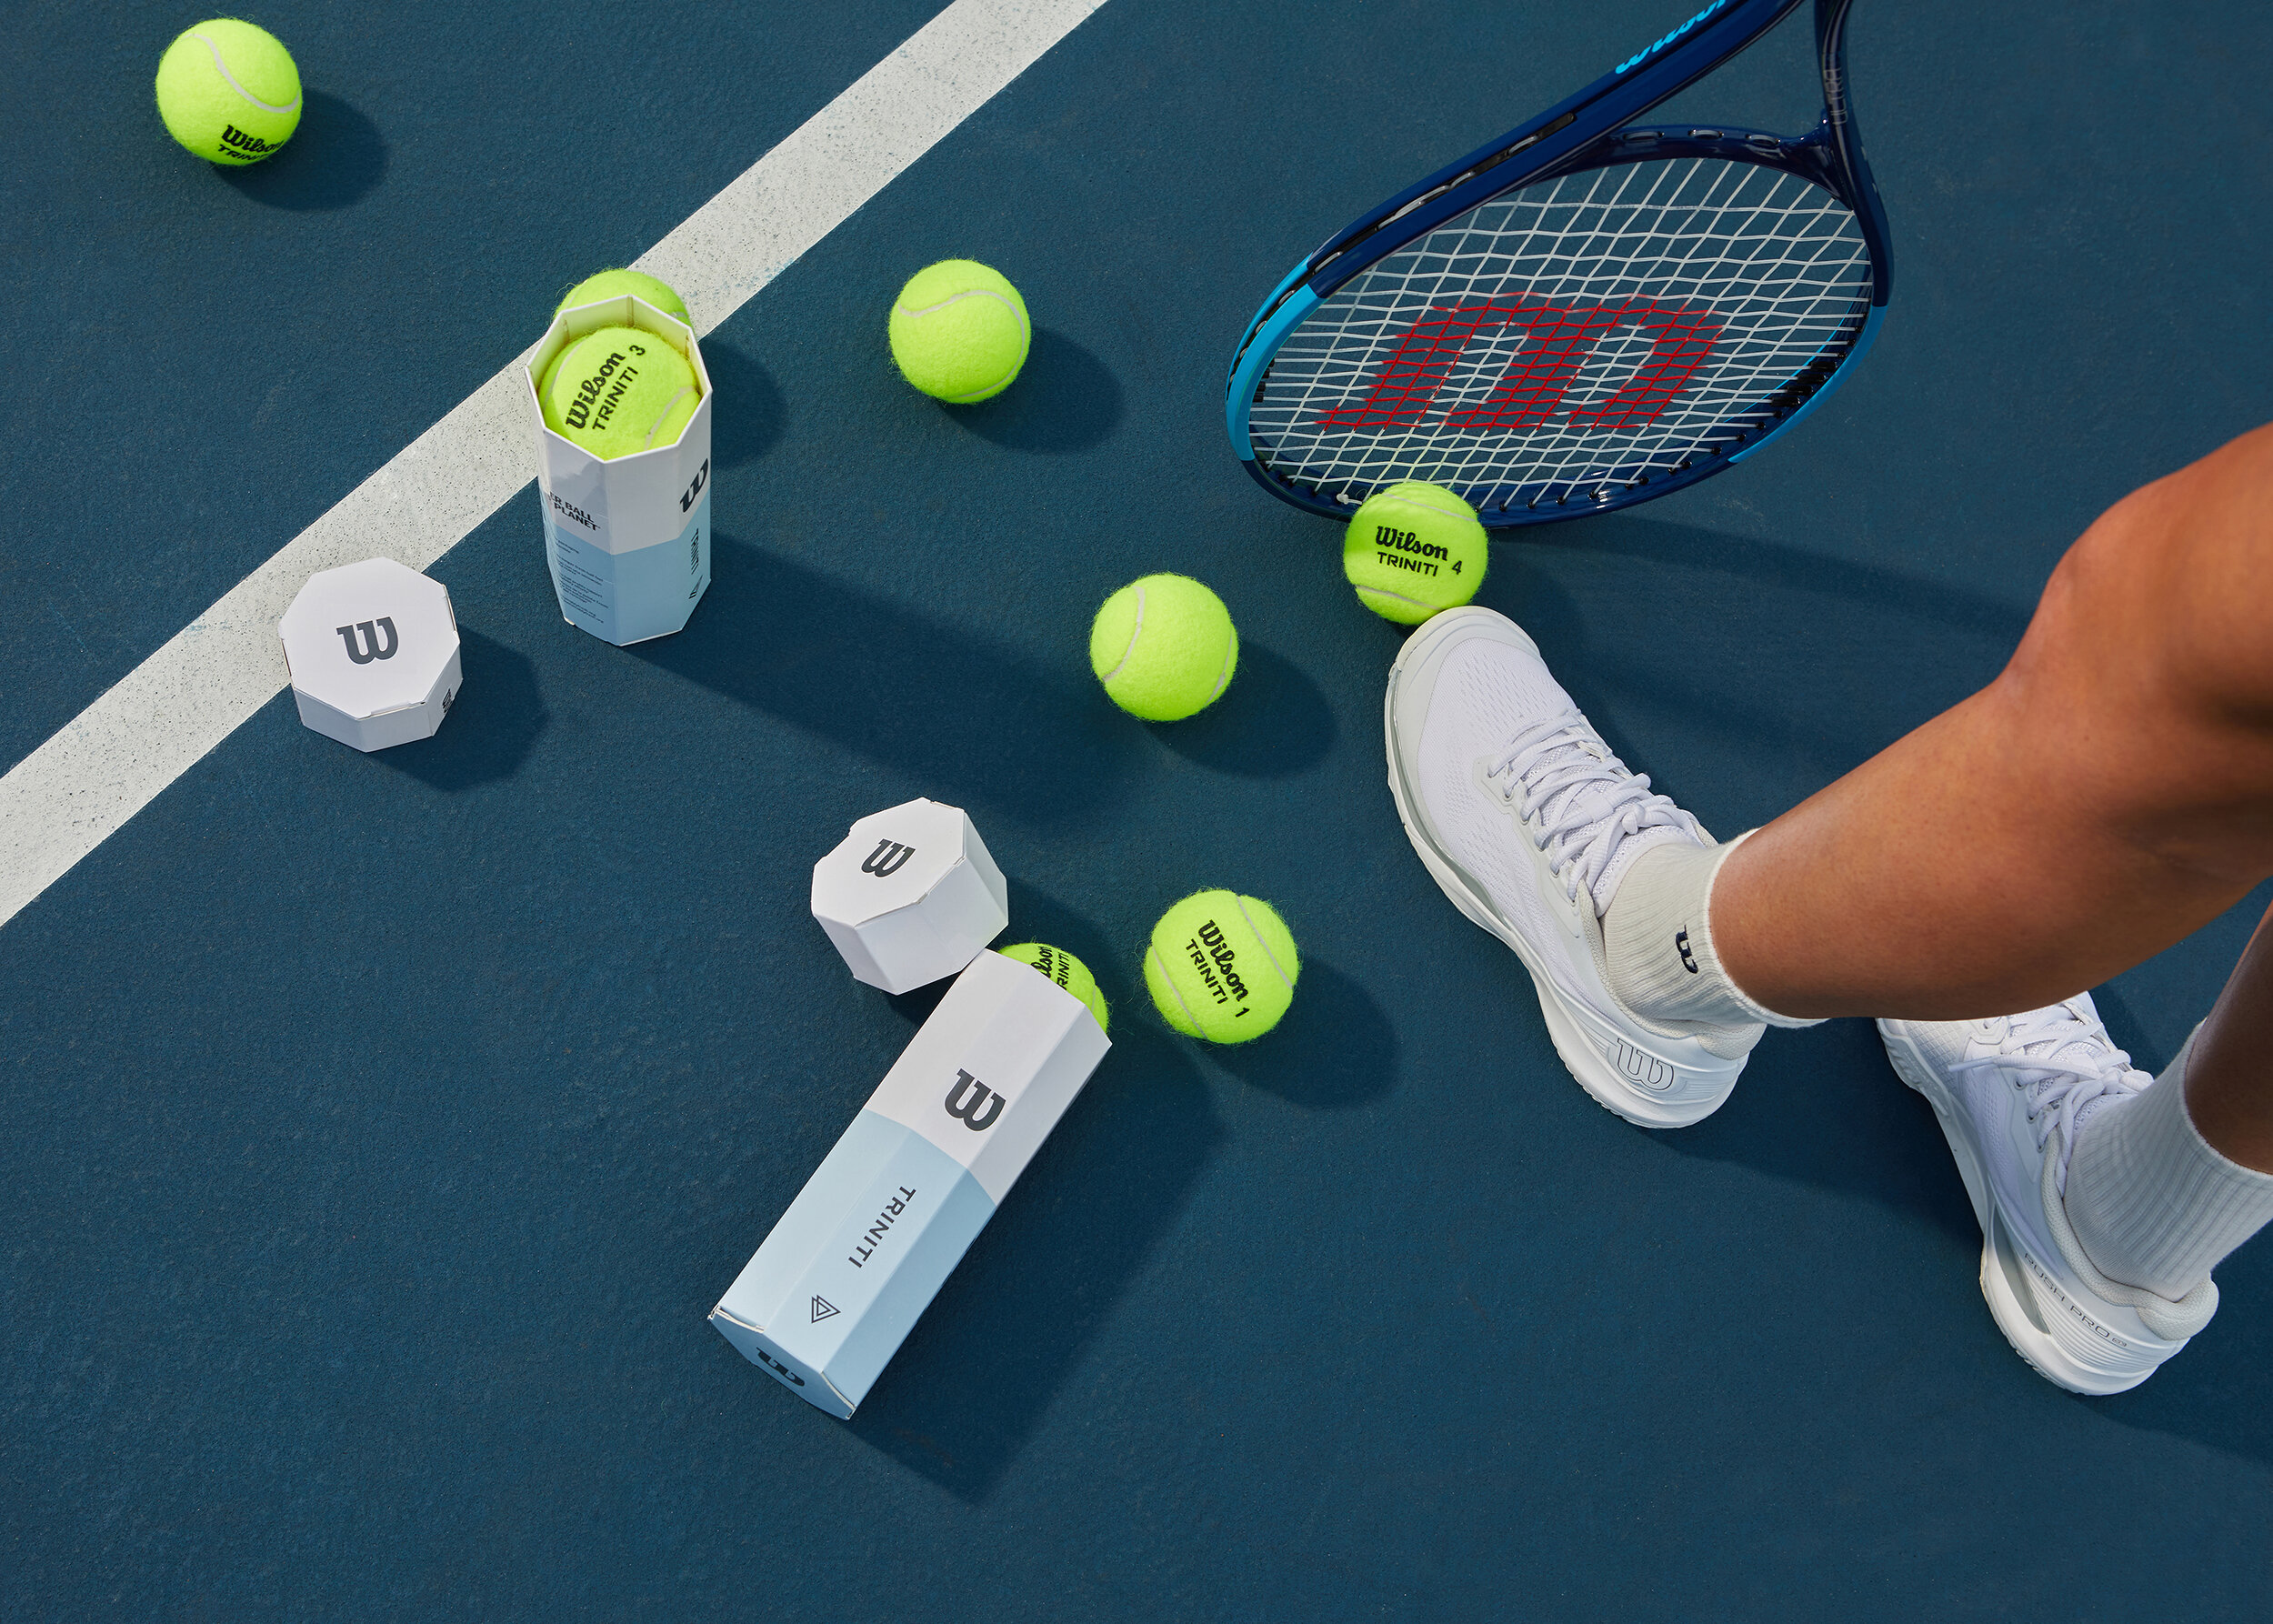 wilson-tennis-sports-advertising-photography-athleticwear-shoes-athletic-wear-athletics-balls-product-clothing-marketing-ad-6